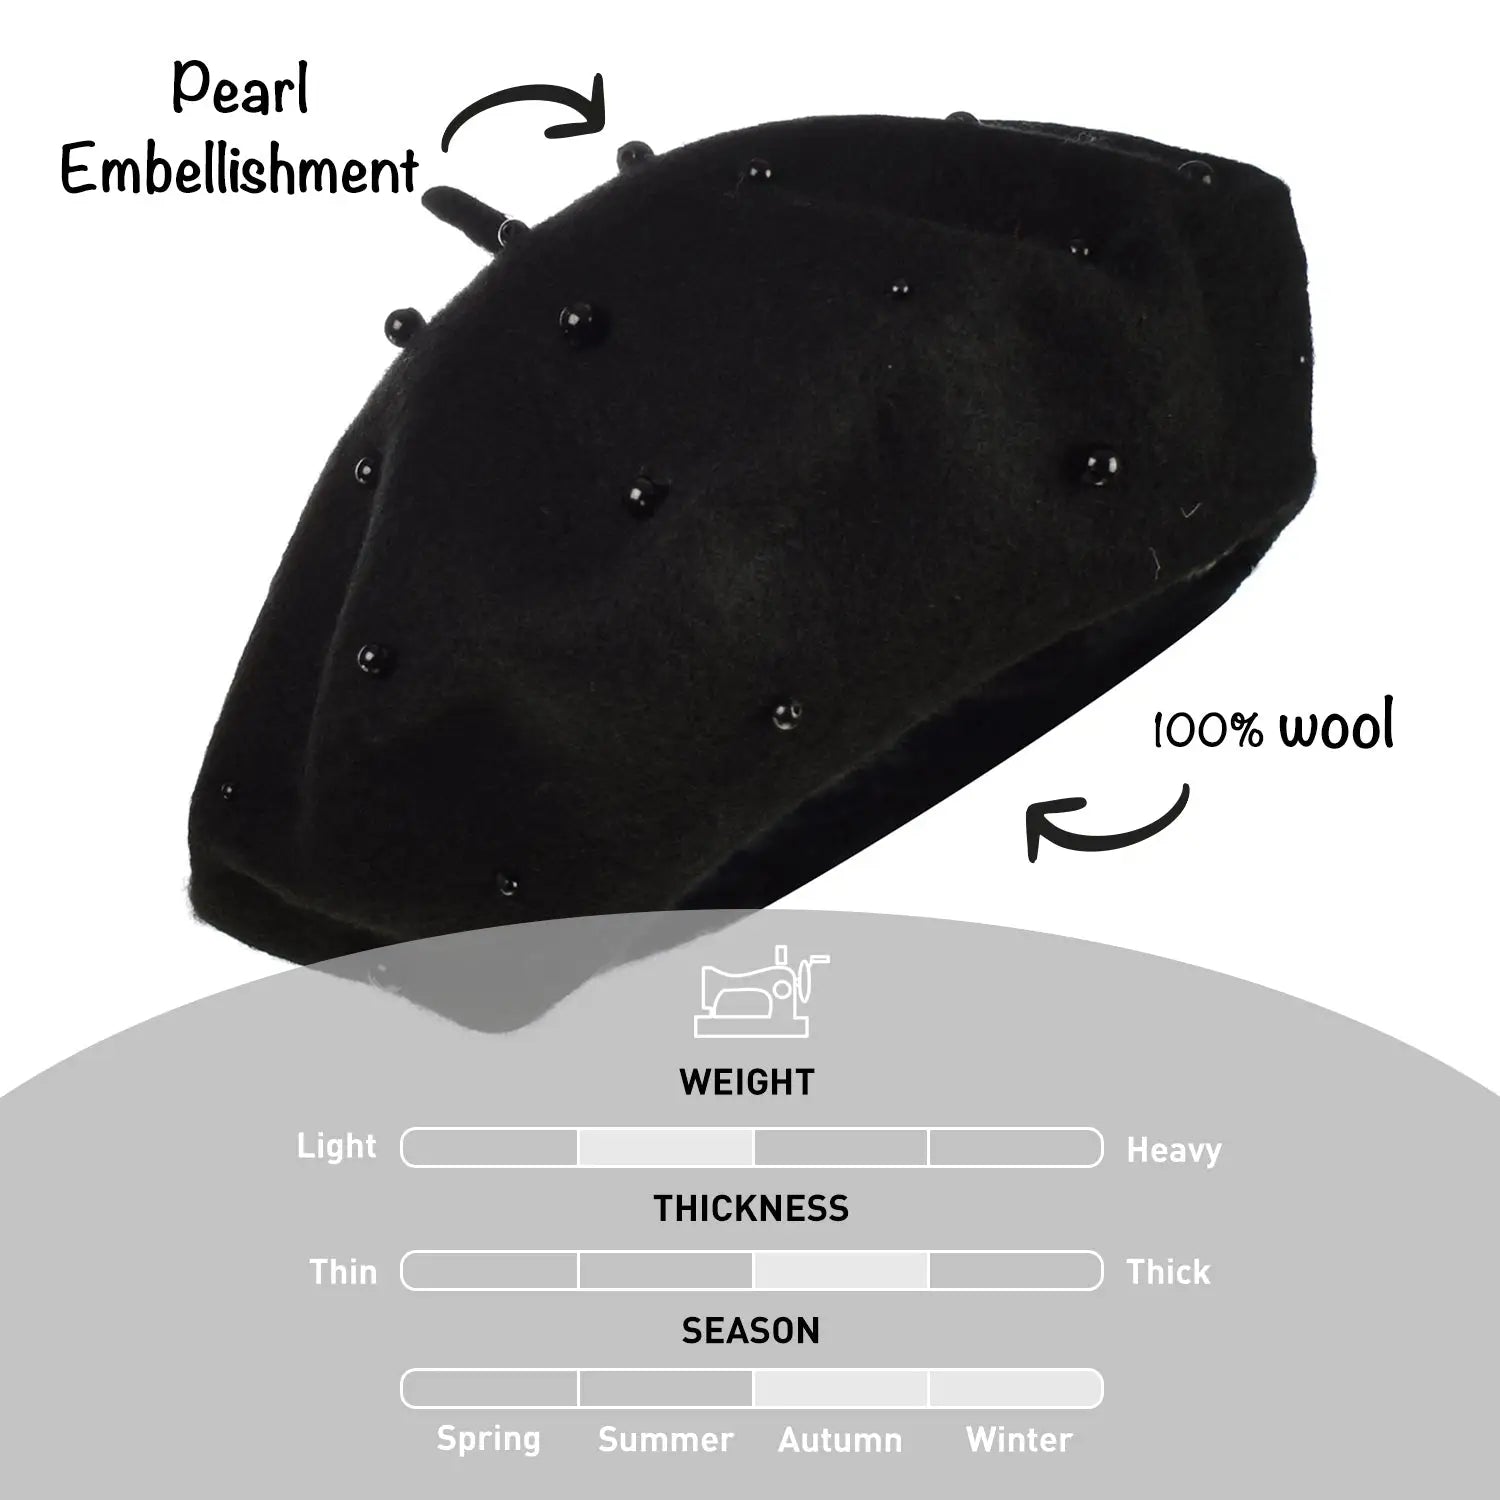 Parisian Classic Beret with Imitation Pearl Embellishment in Diagram on White Background